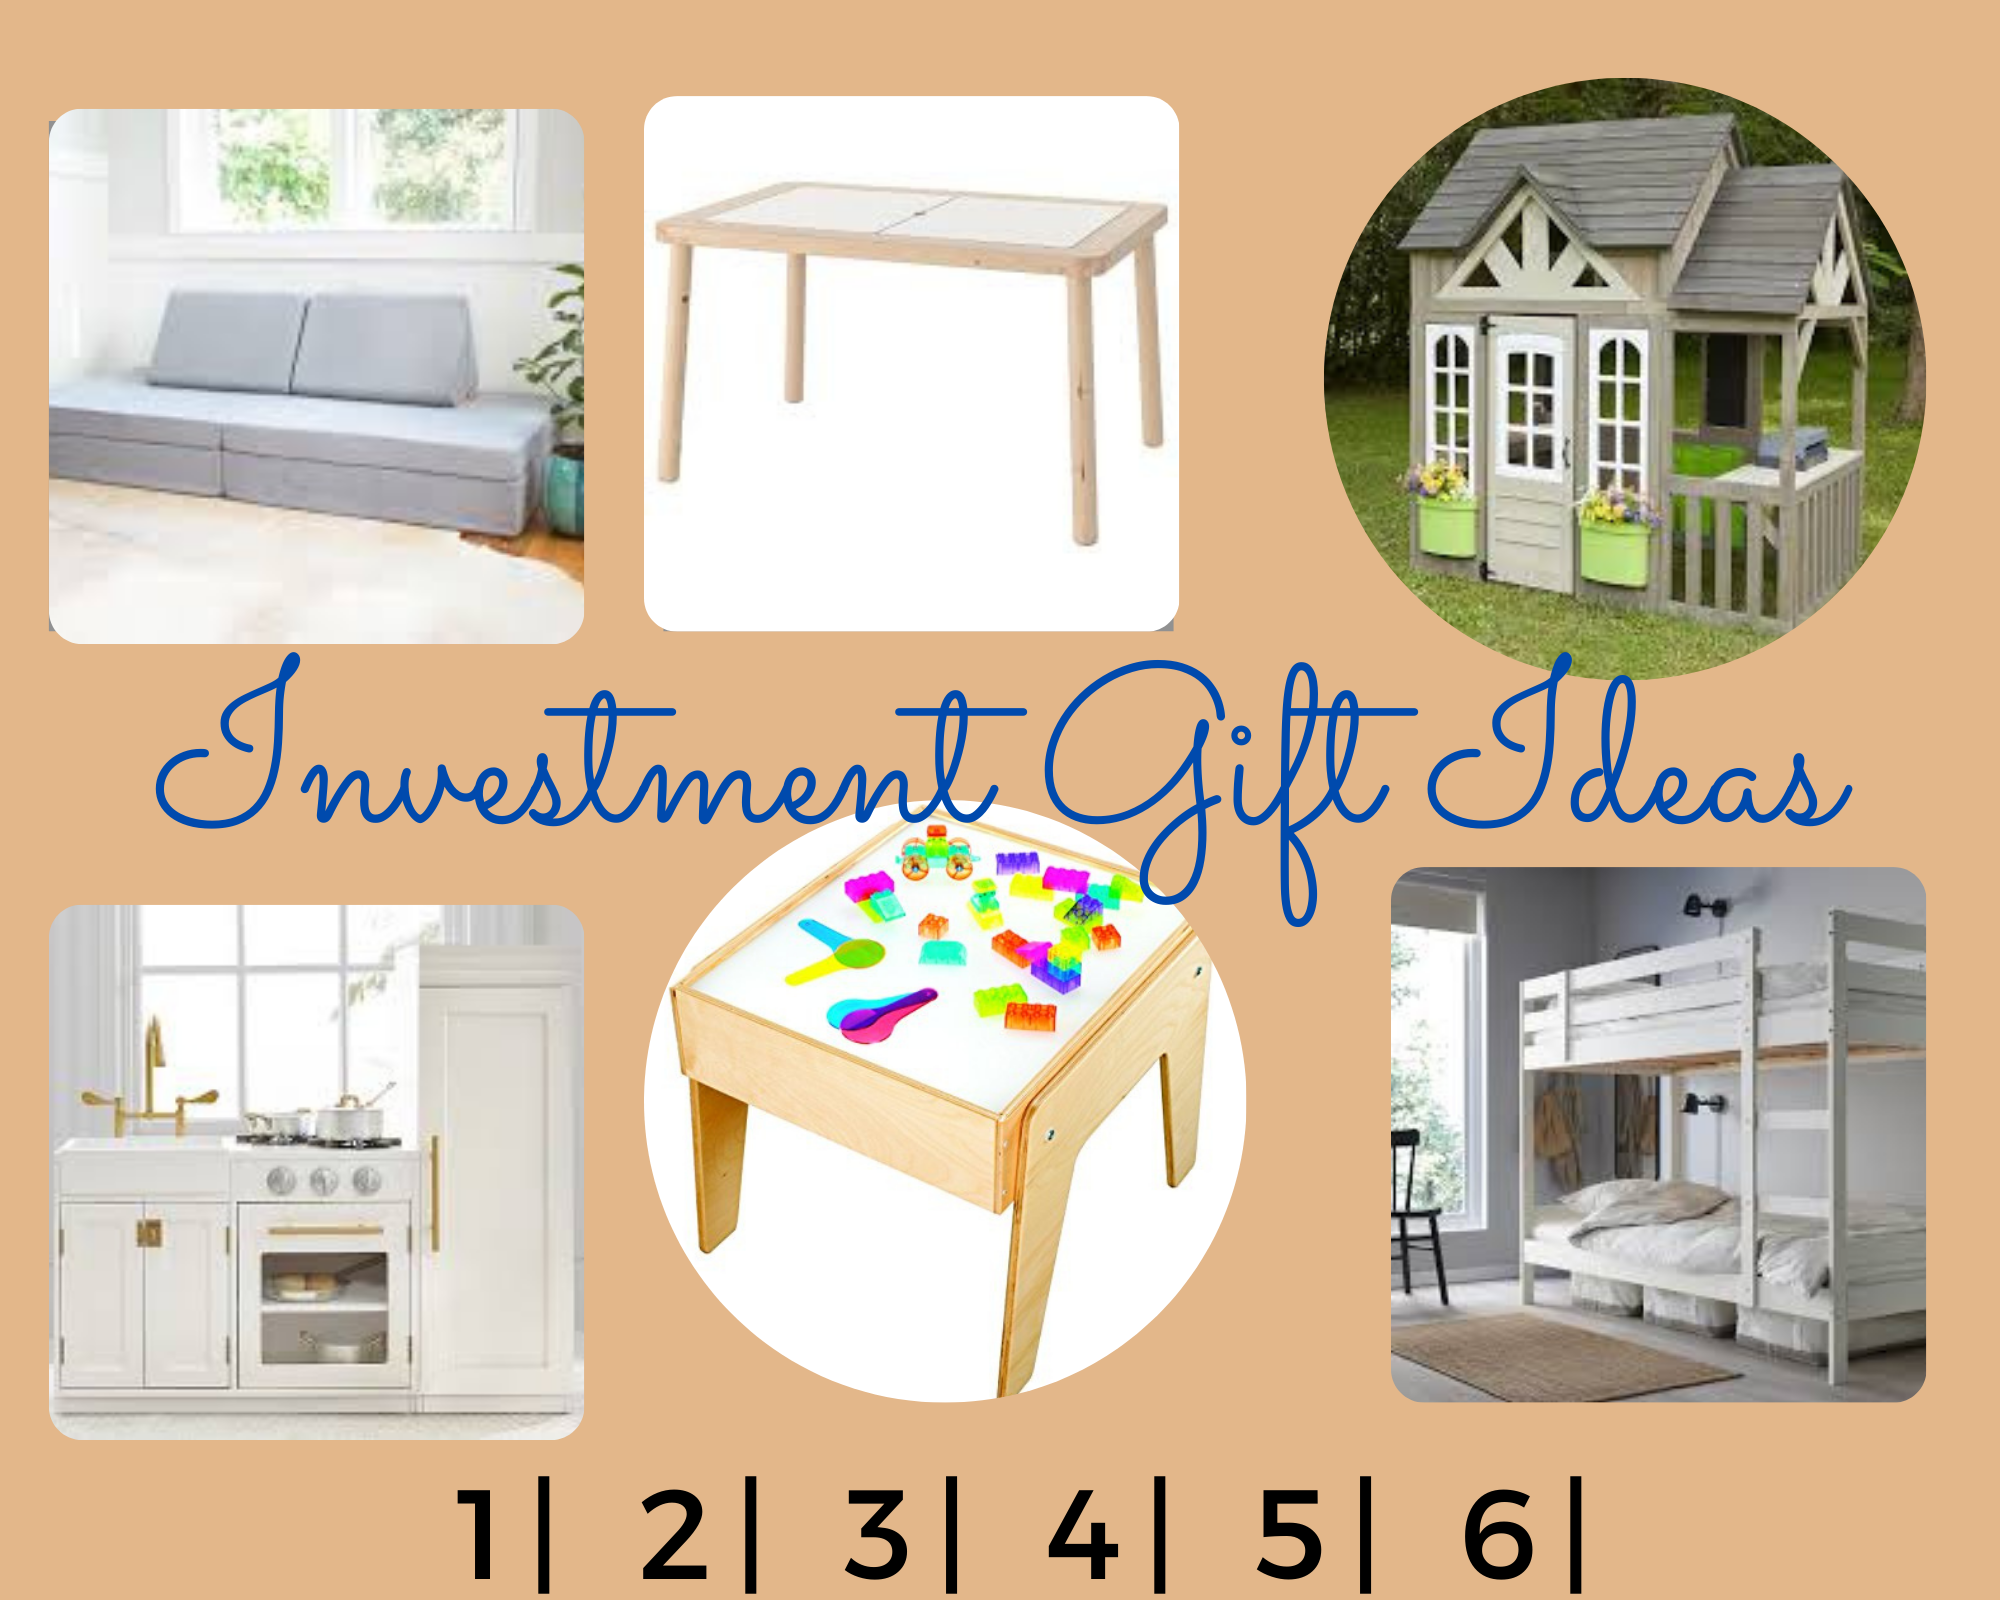 12 Days of Gifting-Ideas for Everyone In Your Life: Investment Gift Ideas